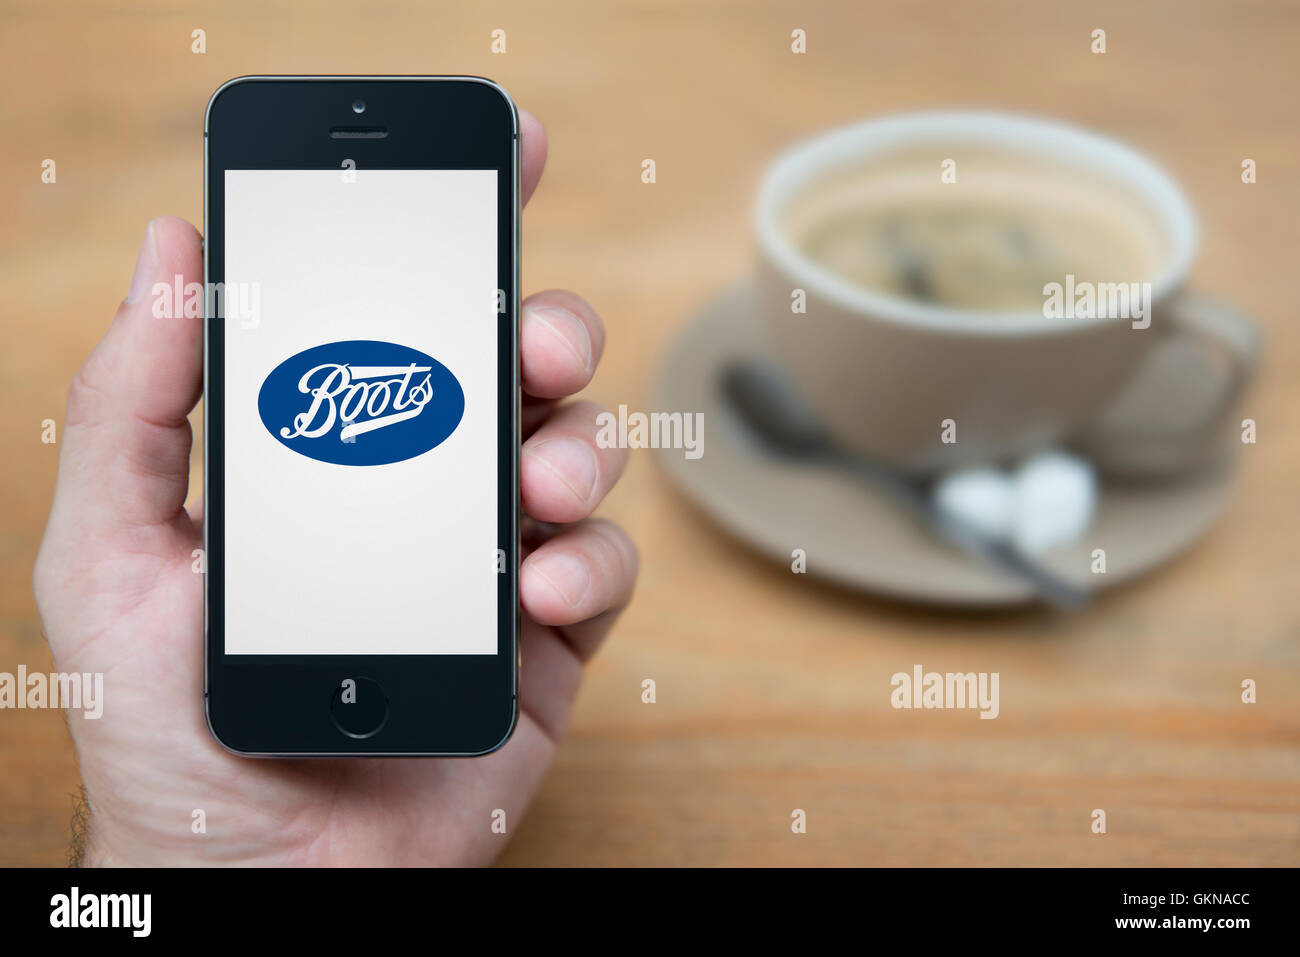 A man looks at his iPhone which displays the Boots logo, while sat with a cup of coffee (Editorial use only). Stock Photo